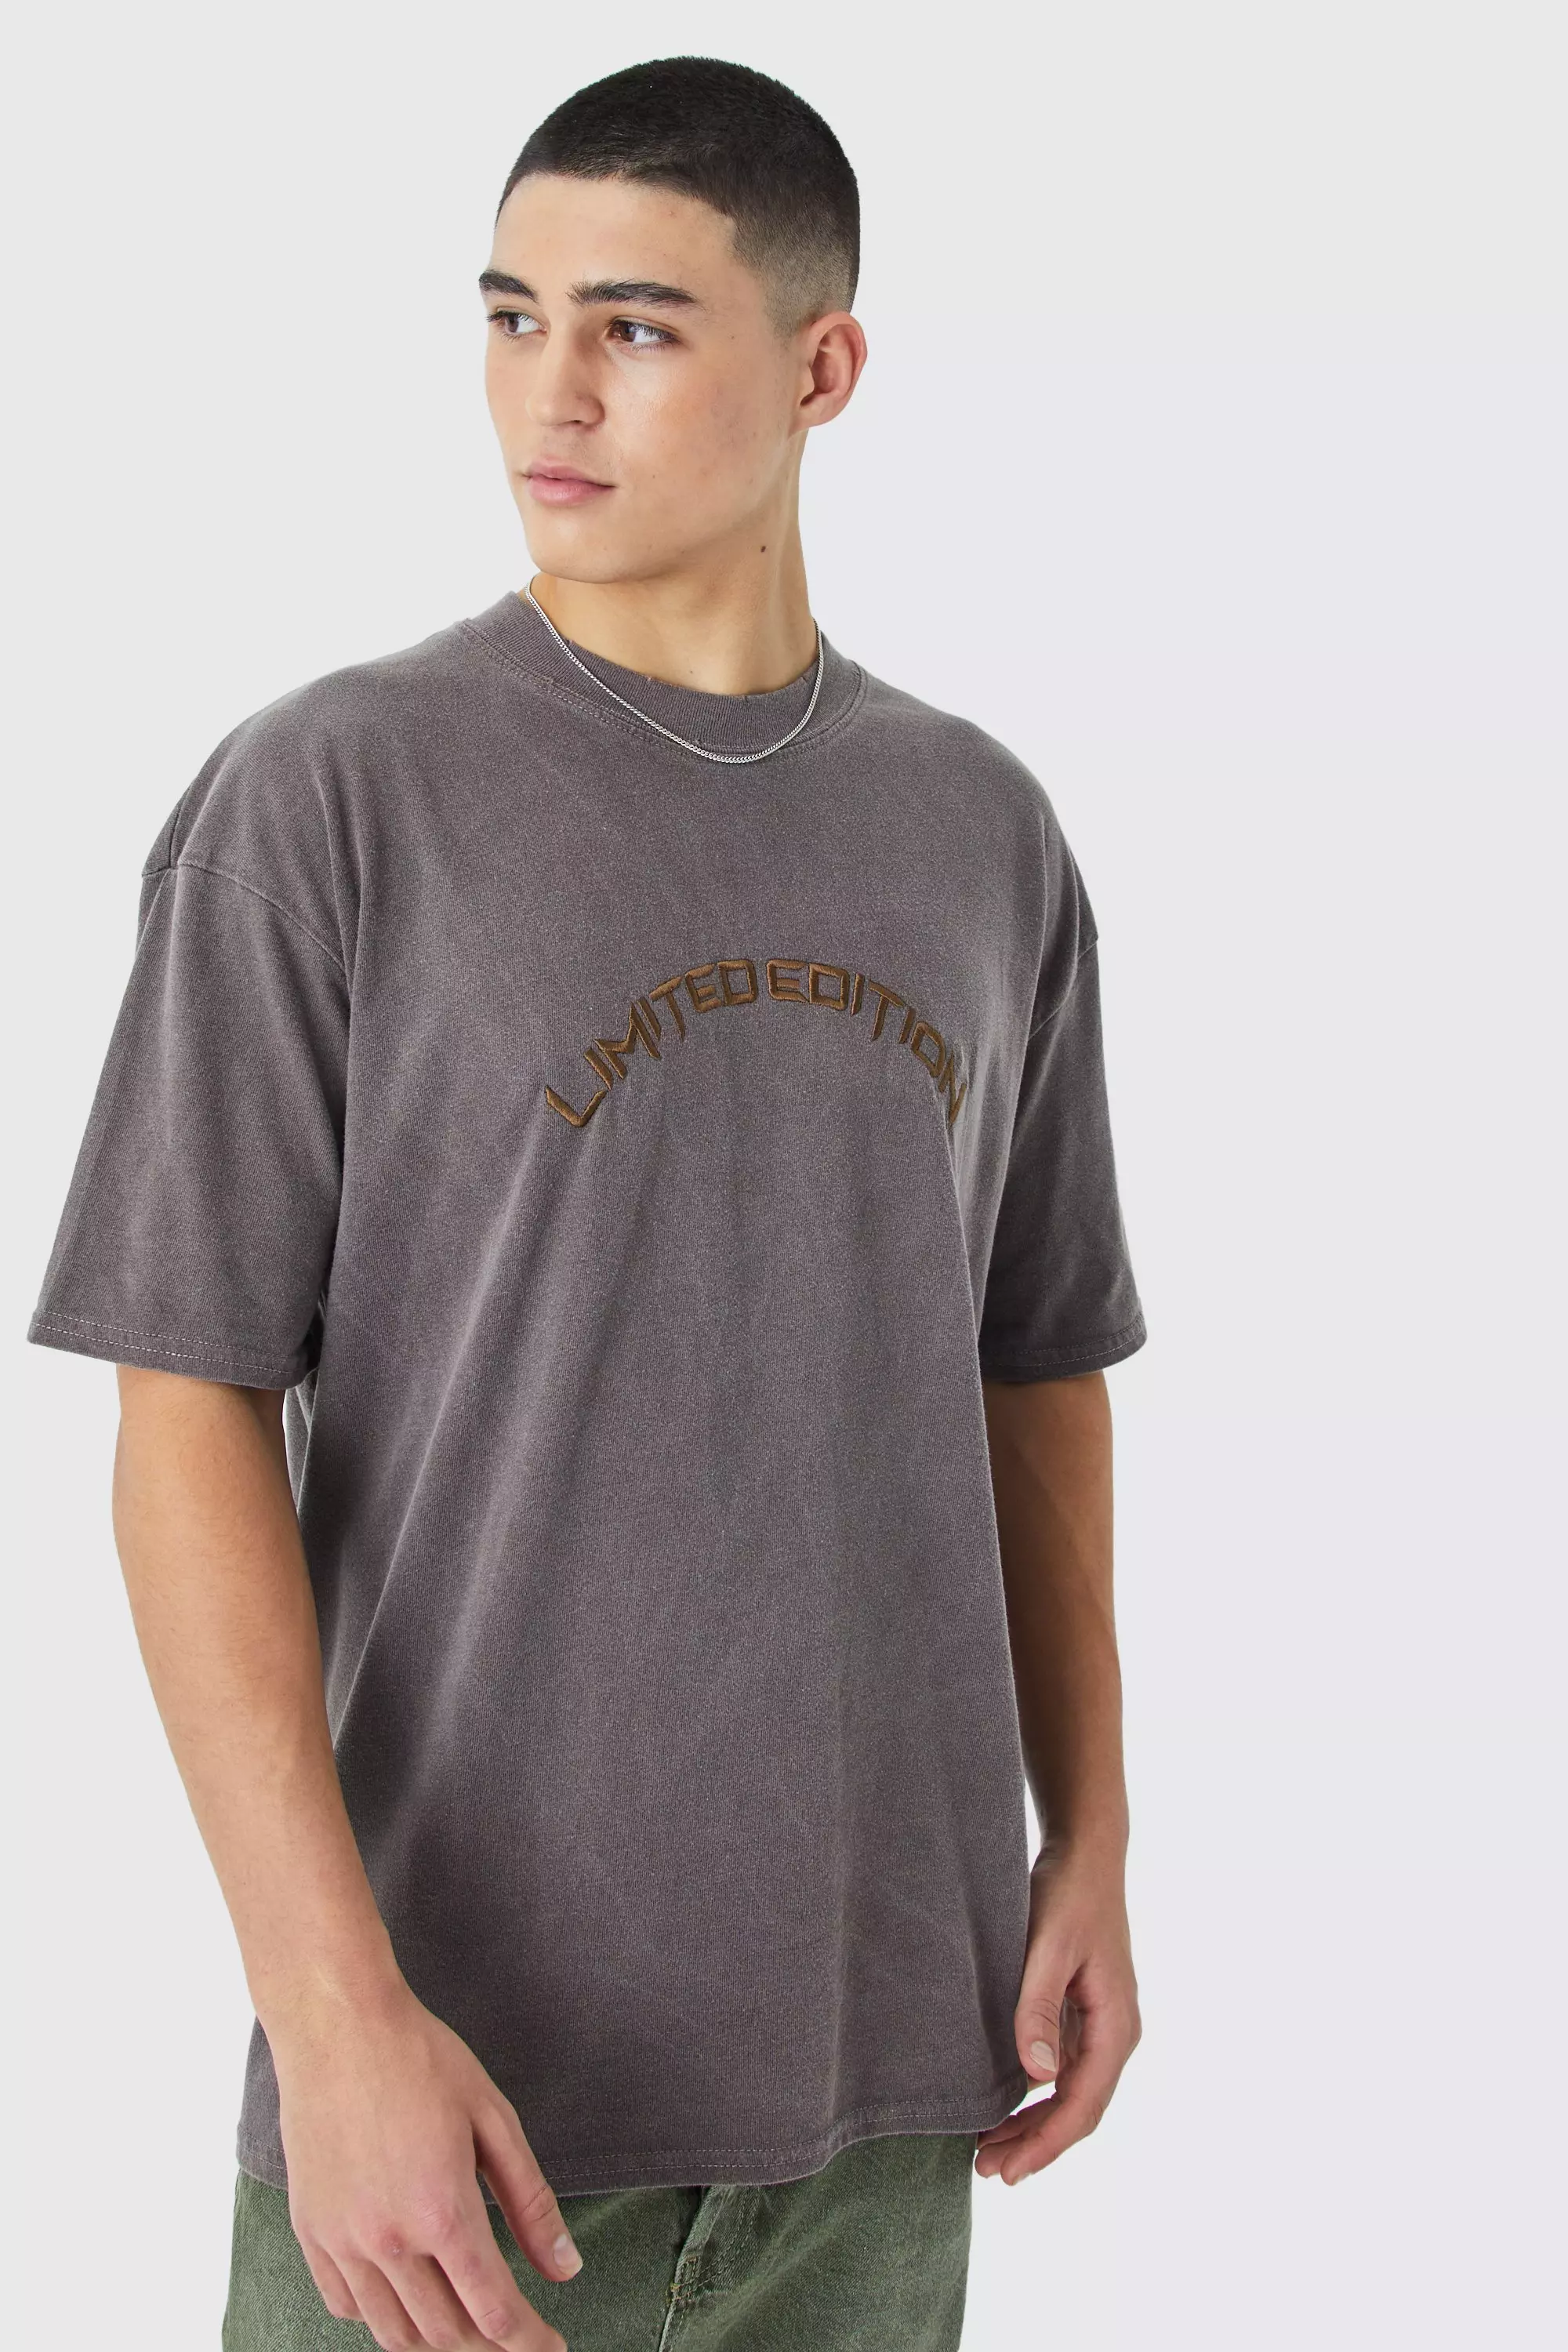 Chocolate Brown Oversized Distressed Washed Embroidered T-shirt